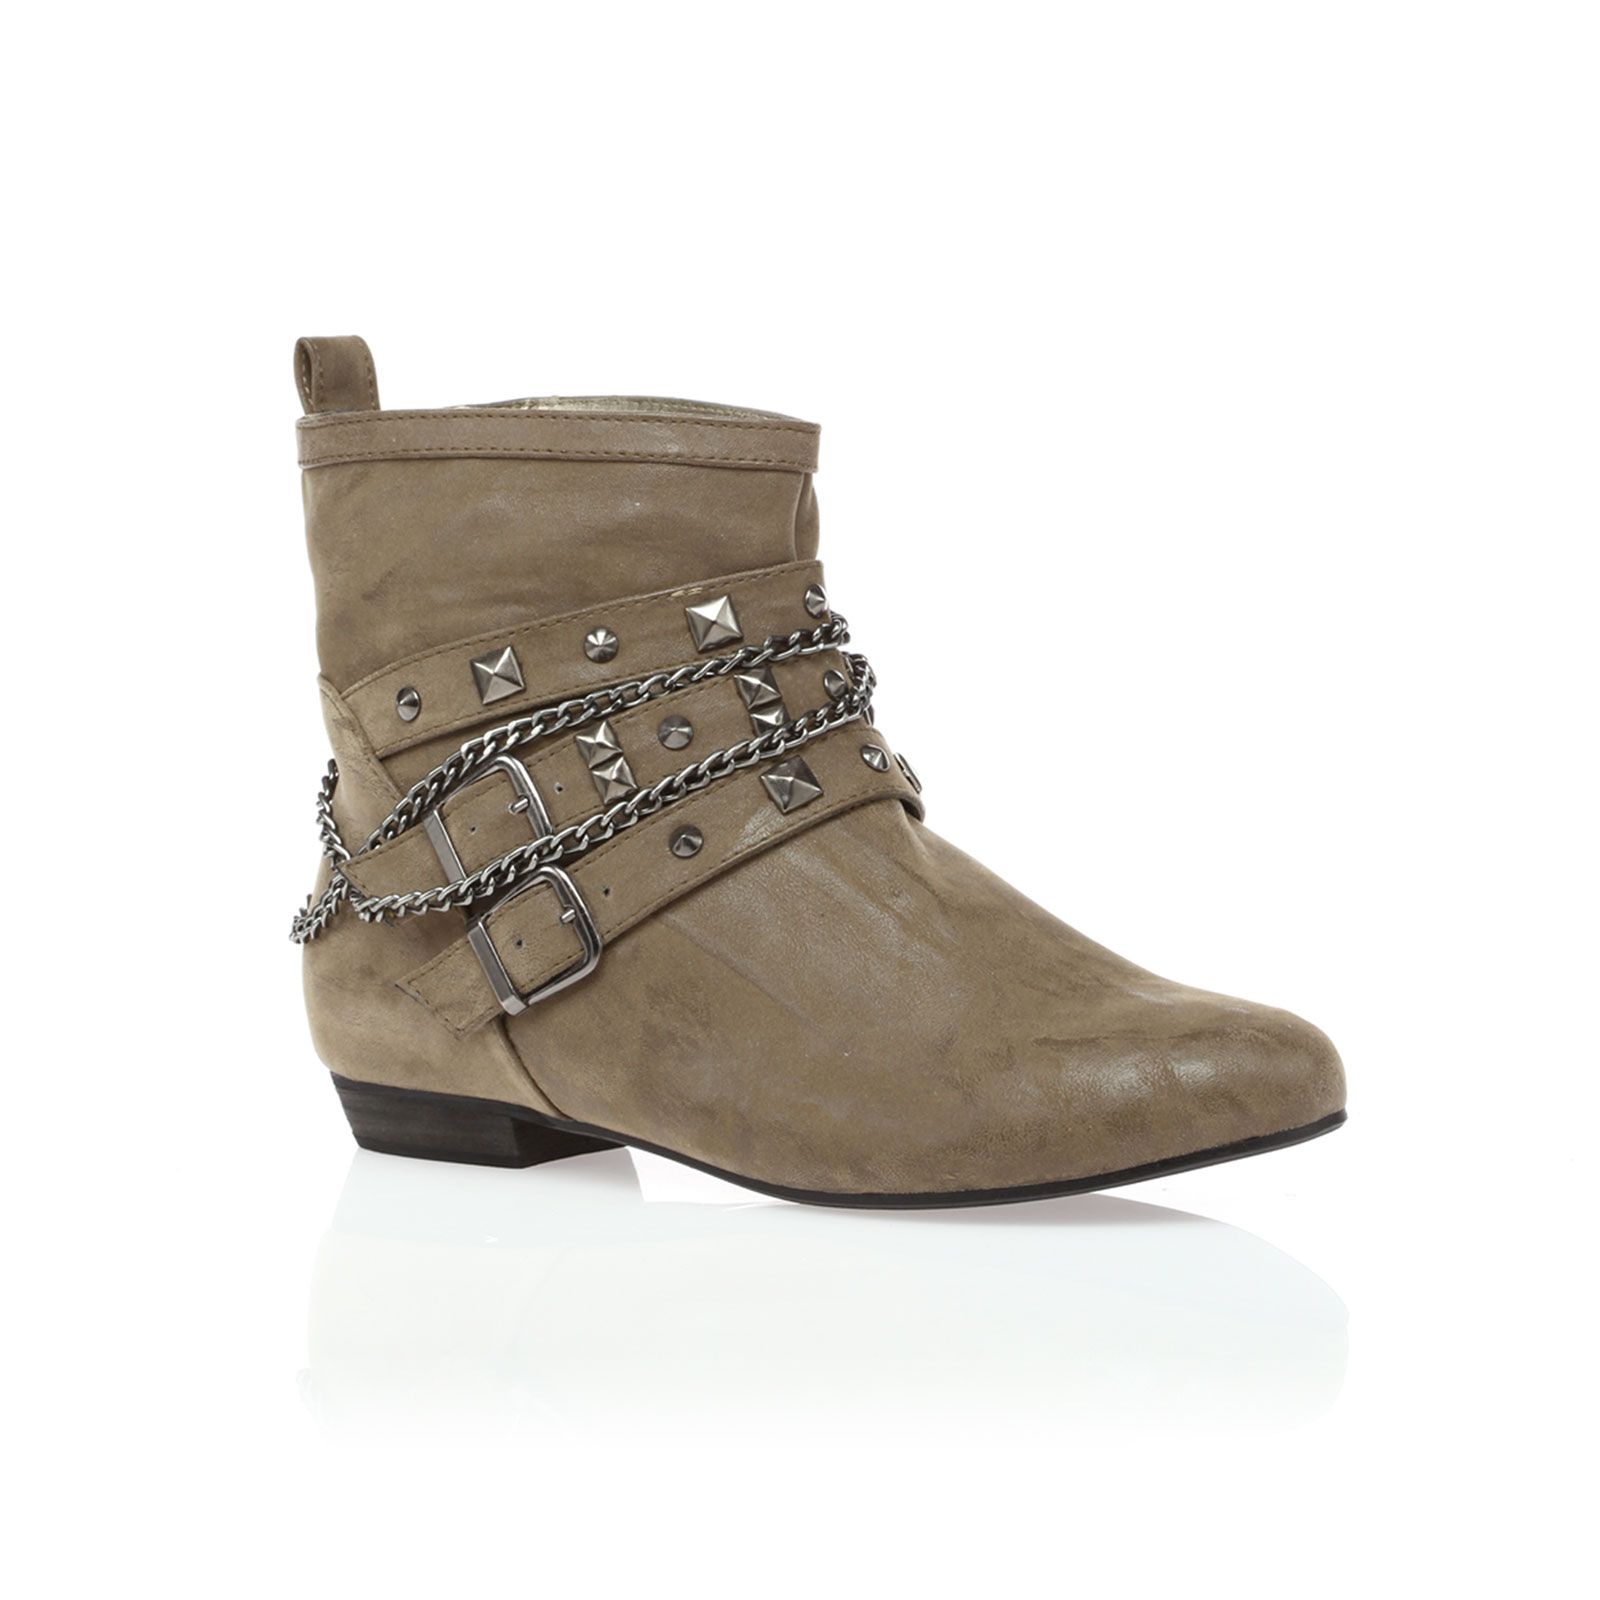 Boots Brandalley - Boots taupe Ana Mariana Prix 31,00 Euros 